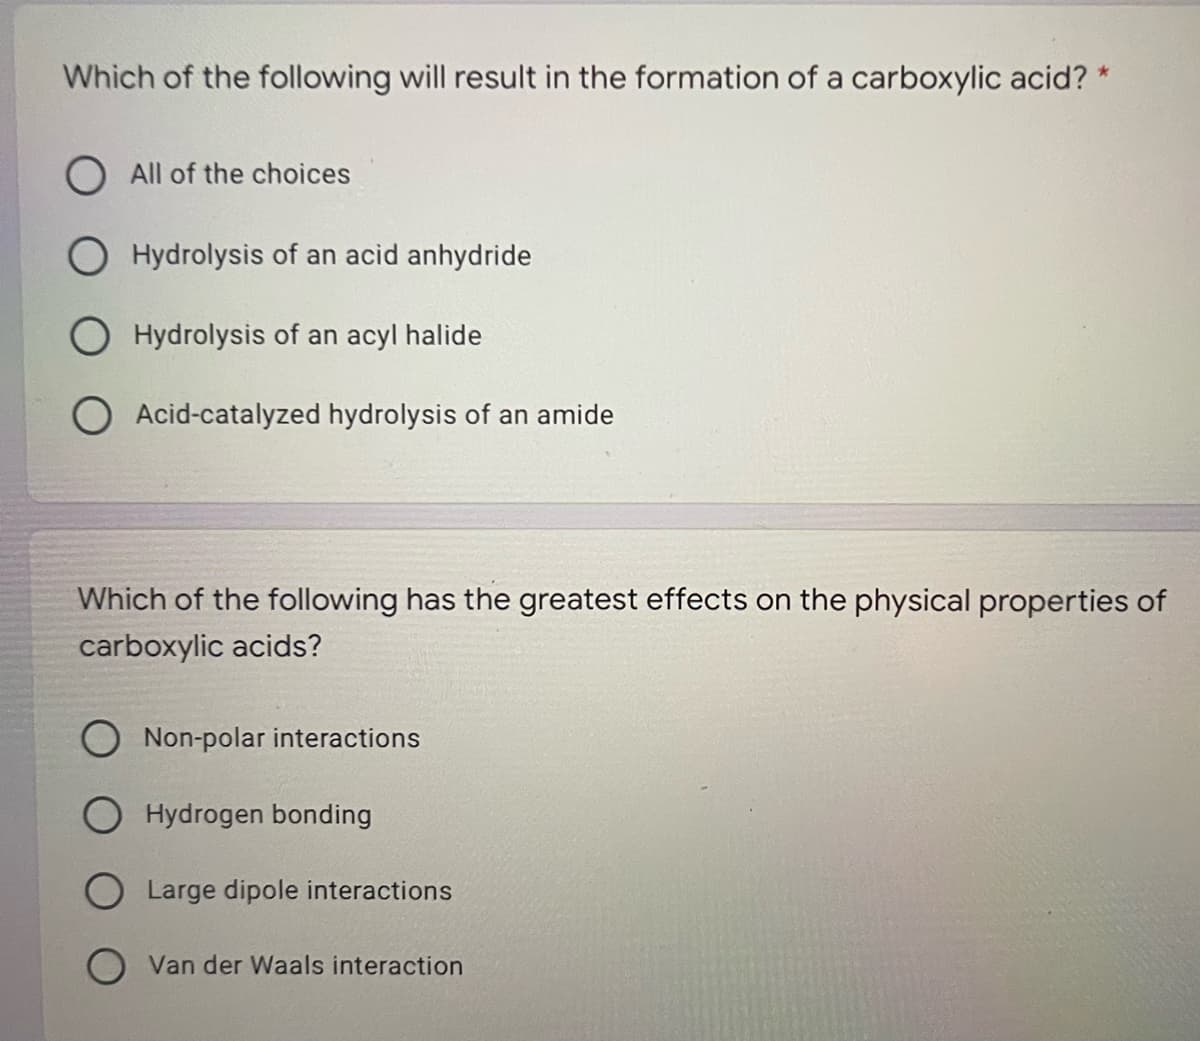 Which of the following will result in the formation of a carboxylic acid? *
O All of the choices
Hydrolysis of an acid anhydride
Hydrolysis of an acyl halide
Acid-catalyzed hydrolysis of an amide
Which of the following has the greatest effects on the physical properties of
carboxylic acids?
Non-polar interactions
Hydrogen bonding
O Large dipole interactions
O Van der Waals interaction
